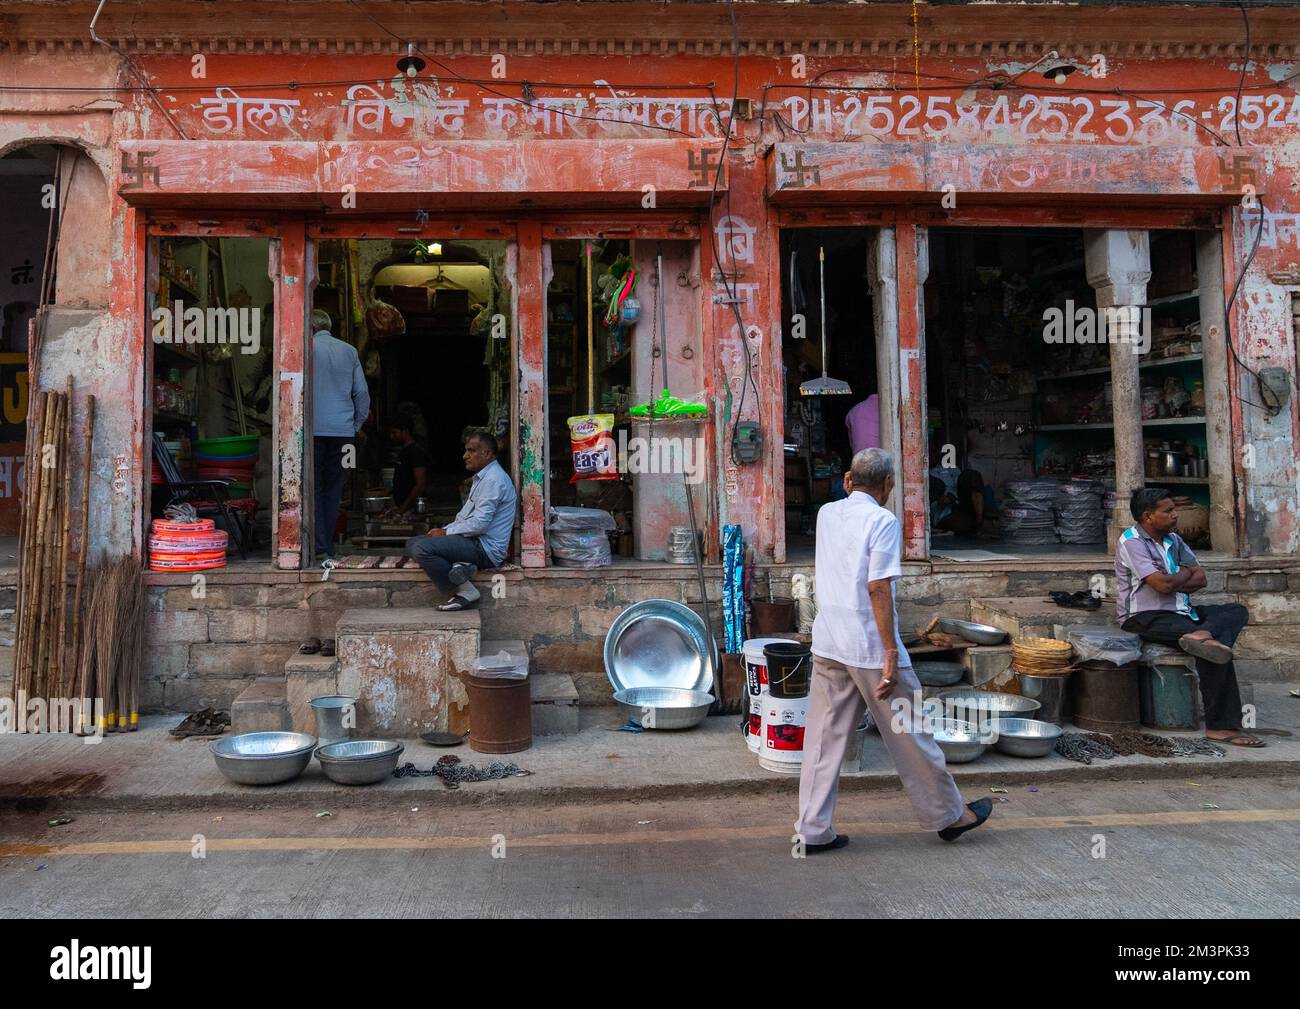 Shops in the street, Rajasthan, Mukundgarh, India Stock Photo